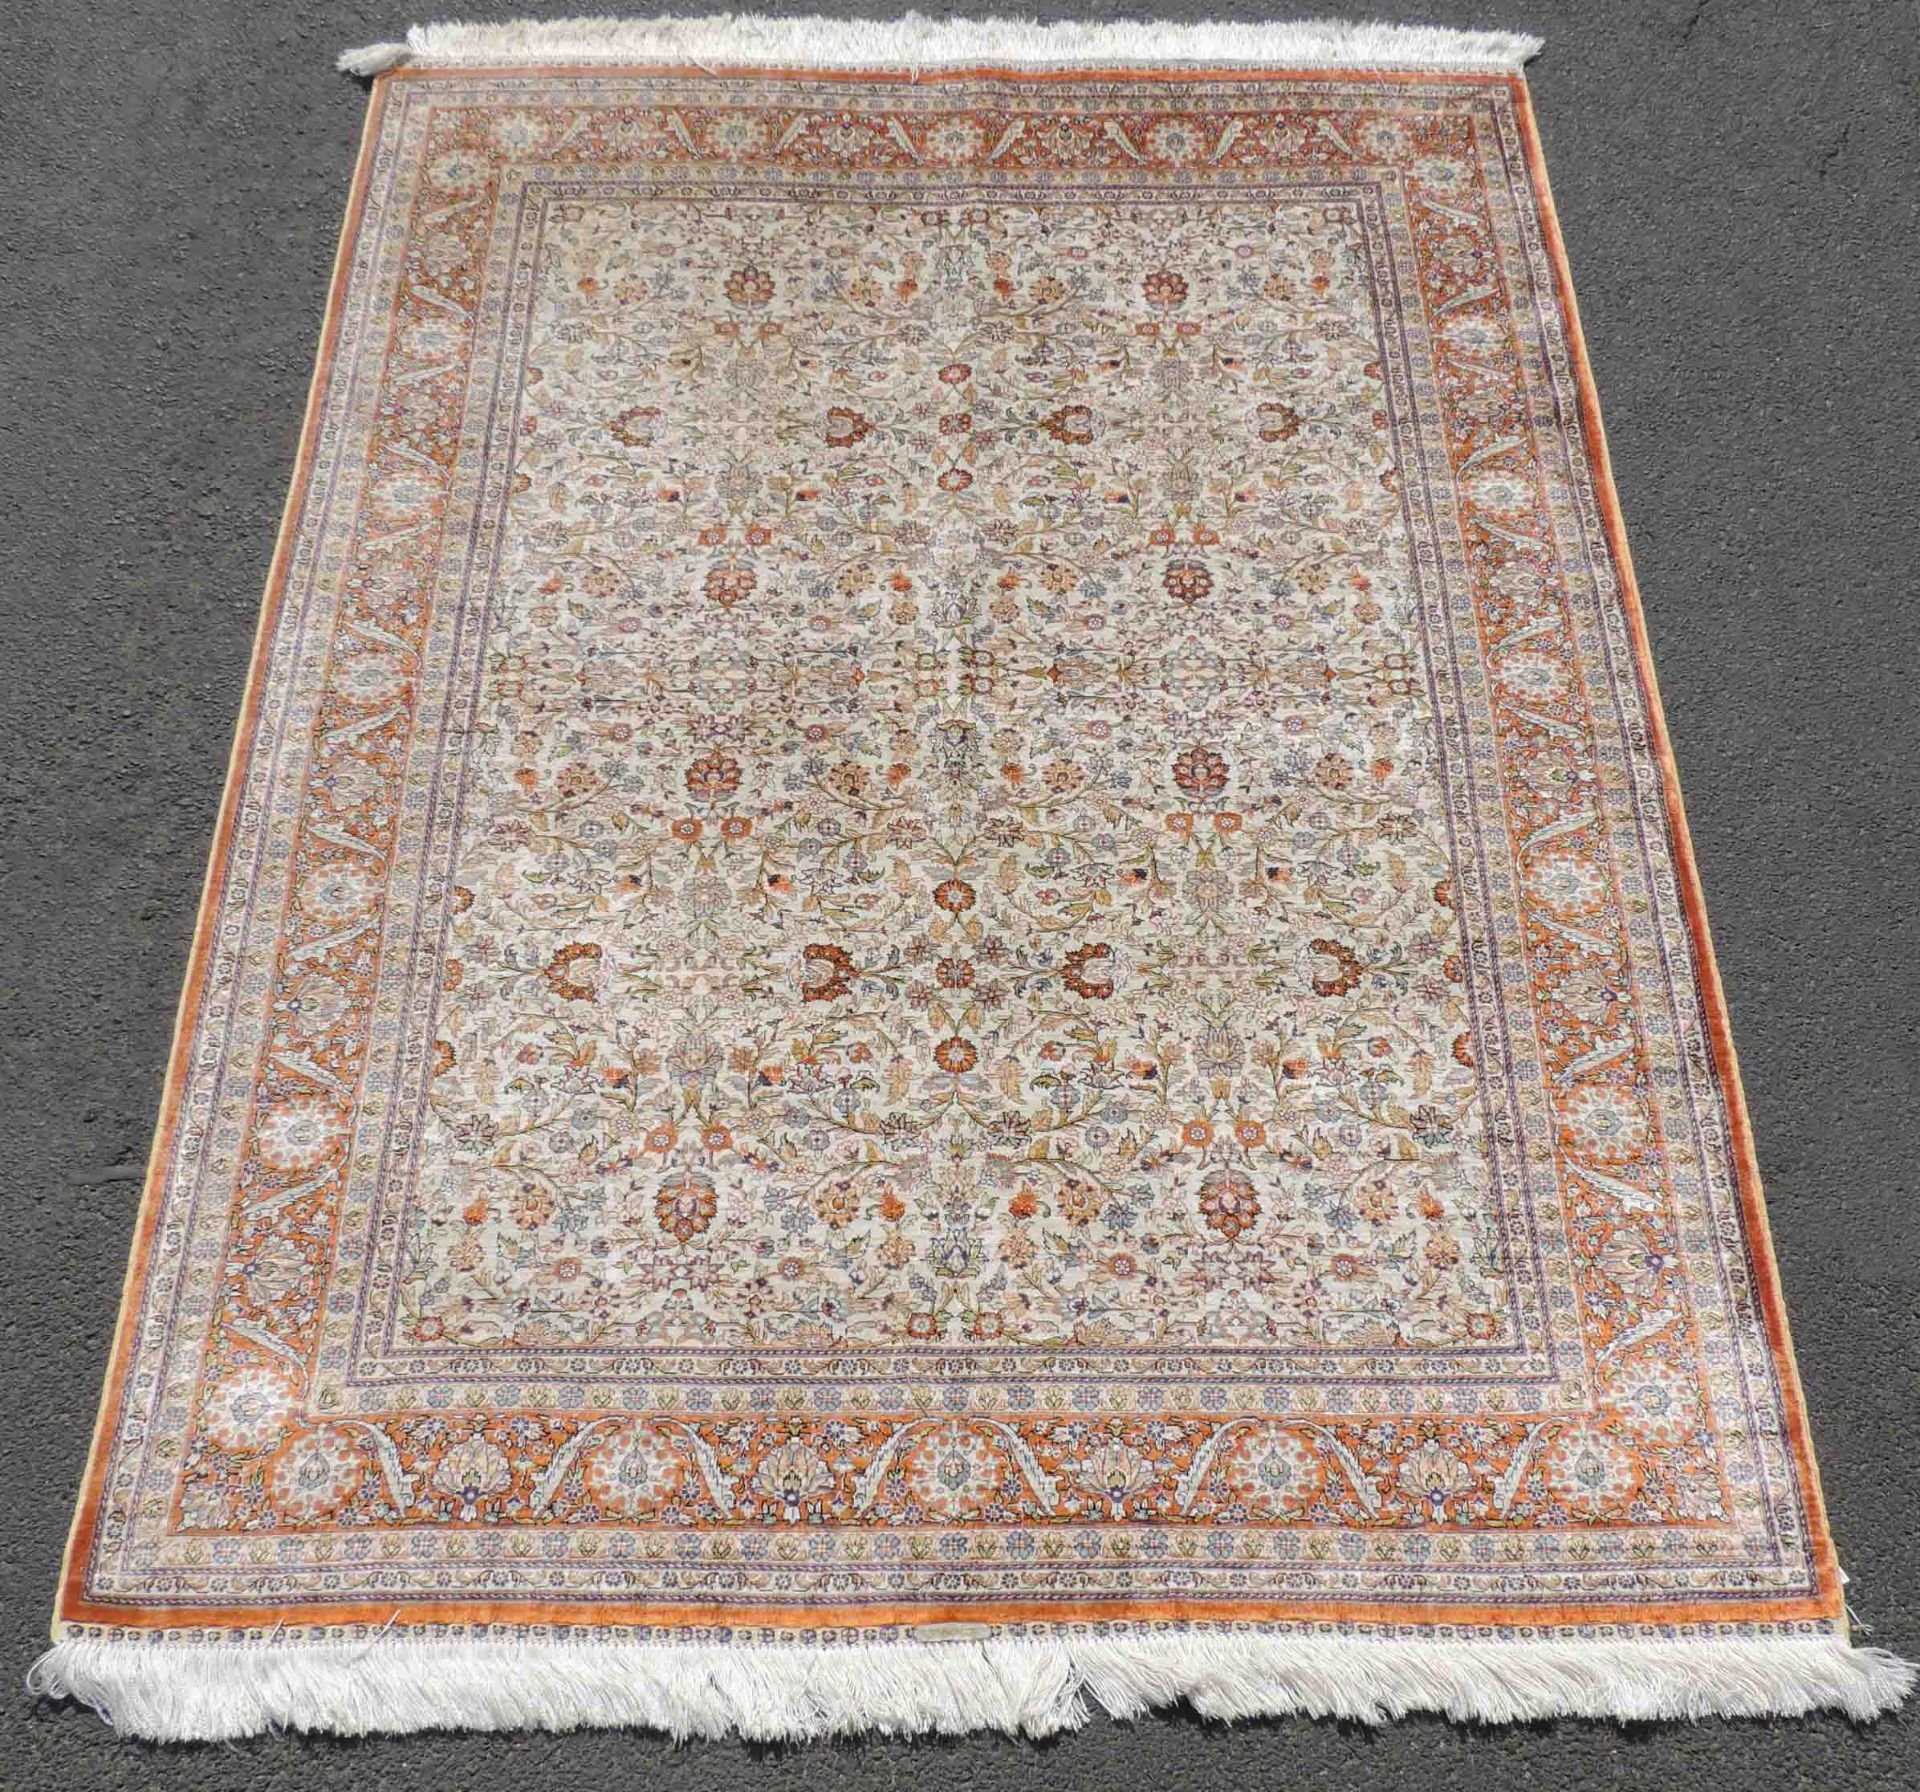 Hereke silk rug. Turkey. Signed. Extremely fine weave.180 cm x 128 cm. Knotted by hand. Silk on